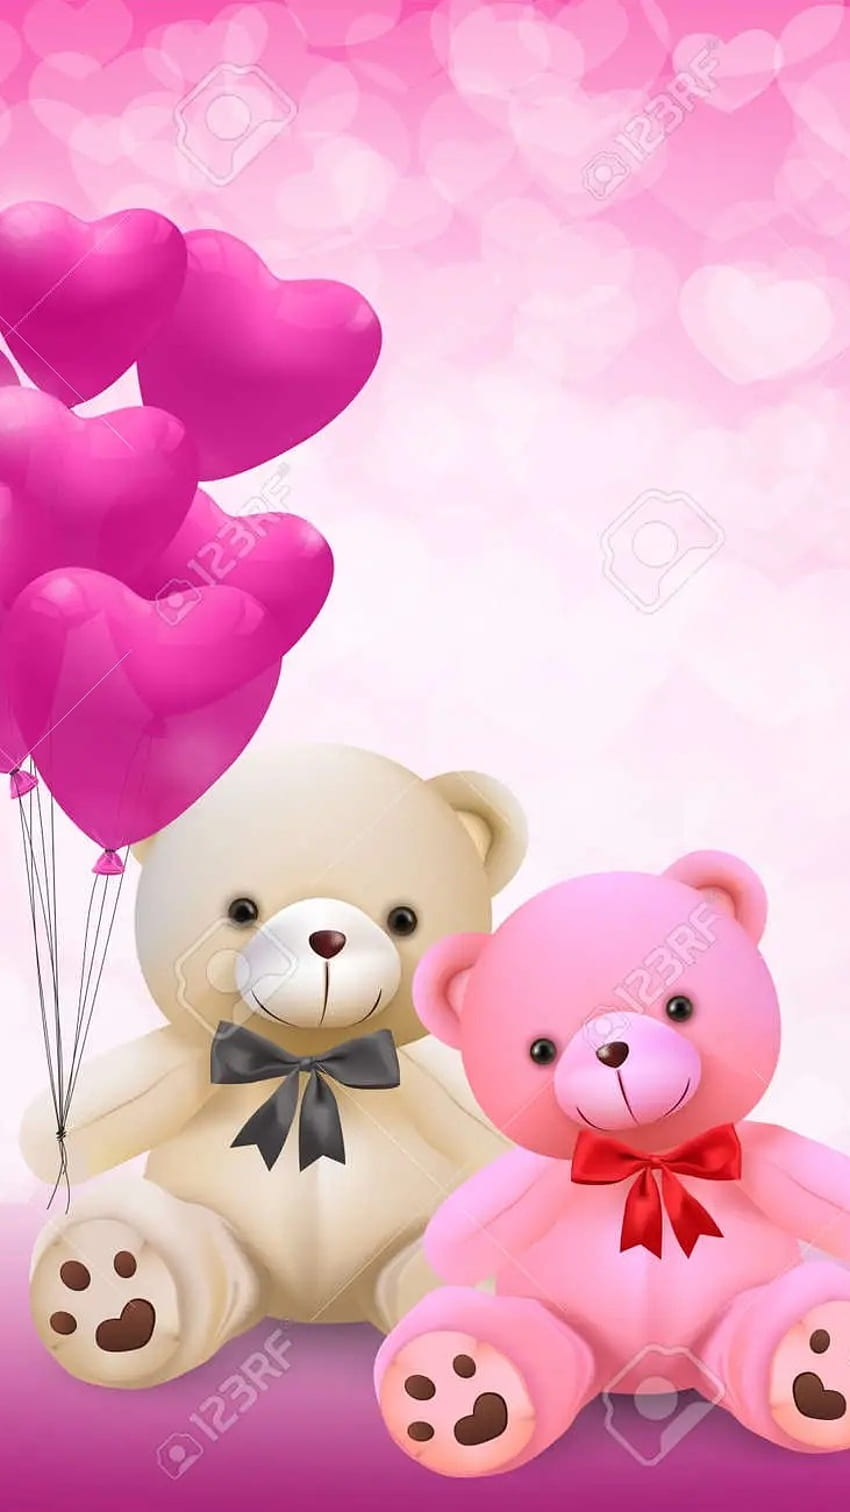 Cute Pink Teddy Bear Wallpapers For Mobile  Wallpaper Cave